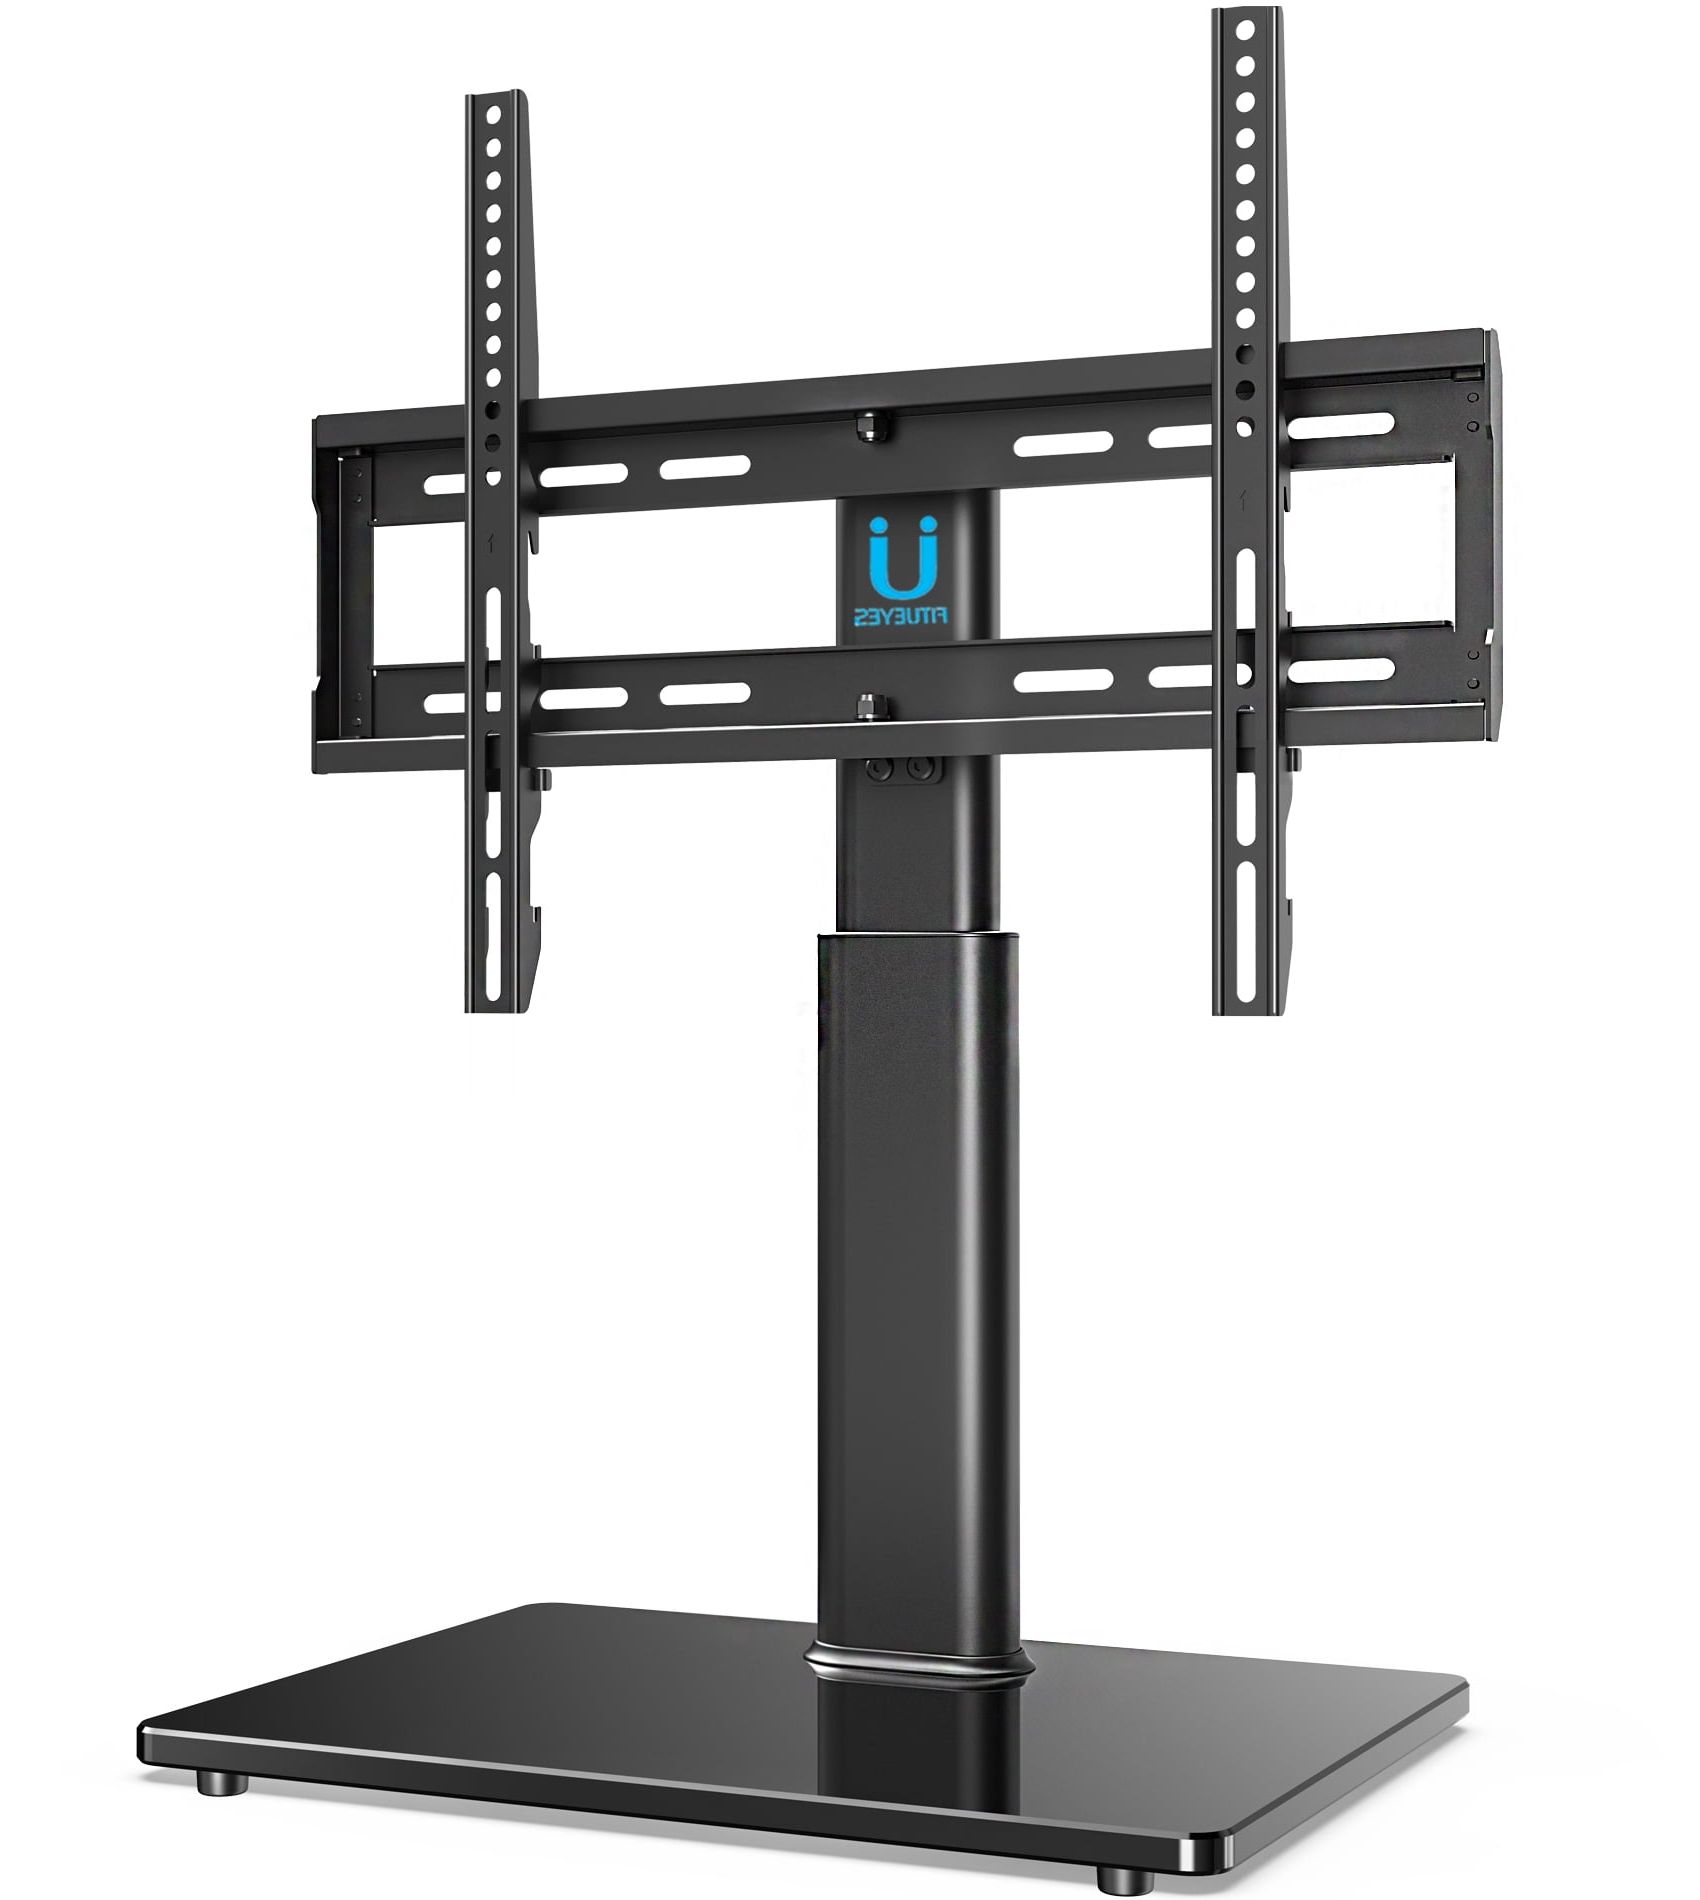 Fitueyes Universal Tv Stand Tabletop Base With Swivel Mount For 32 To With Regard To Well Liked Universal Tabletop Tv Stands (View 7 of 15)